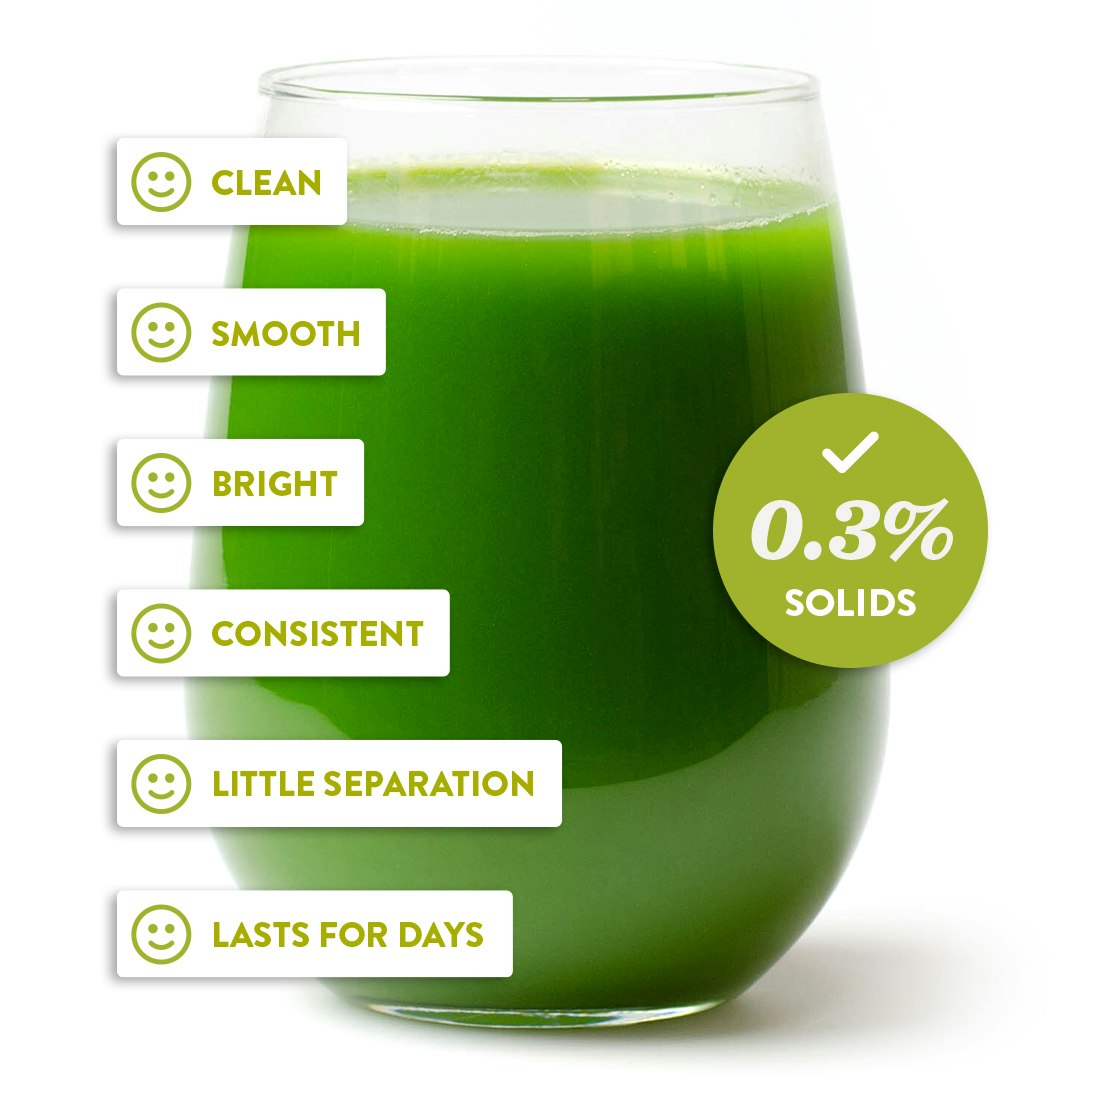 Clean green Goodnature juice in glass